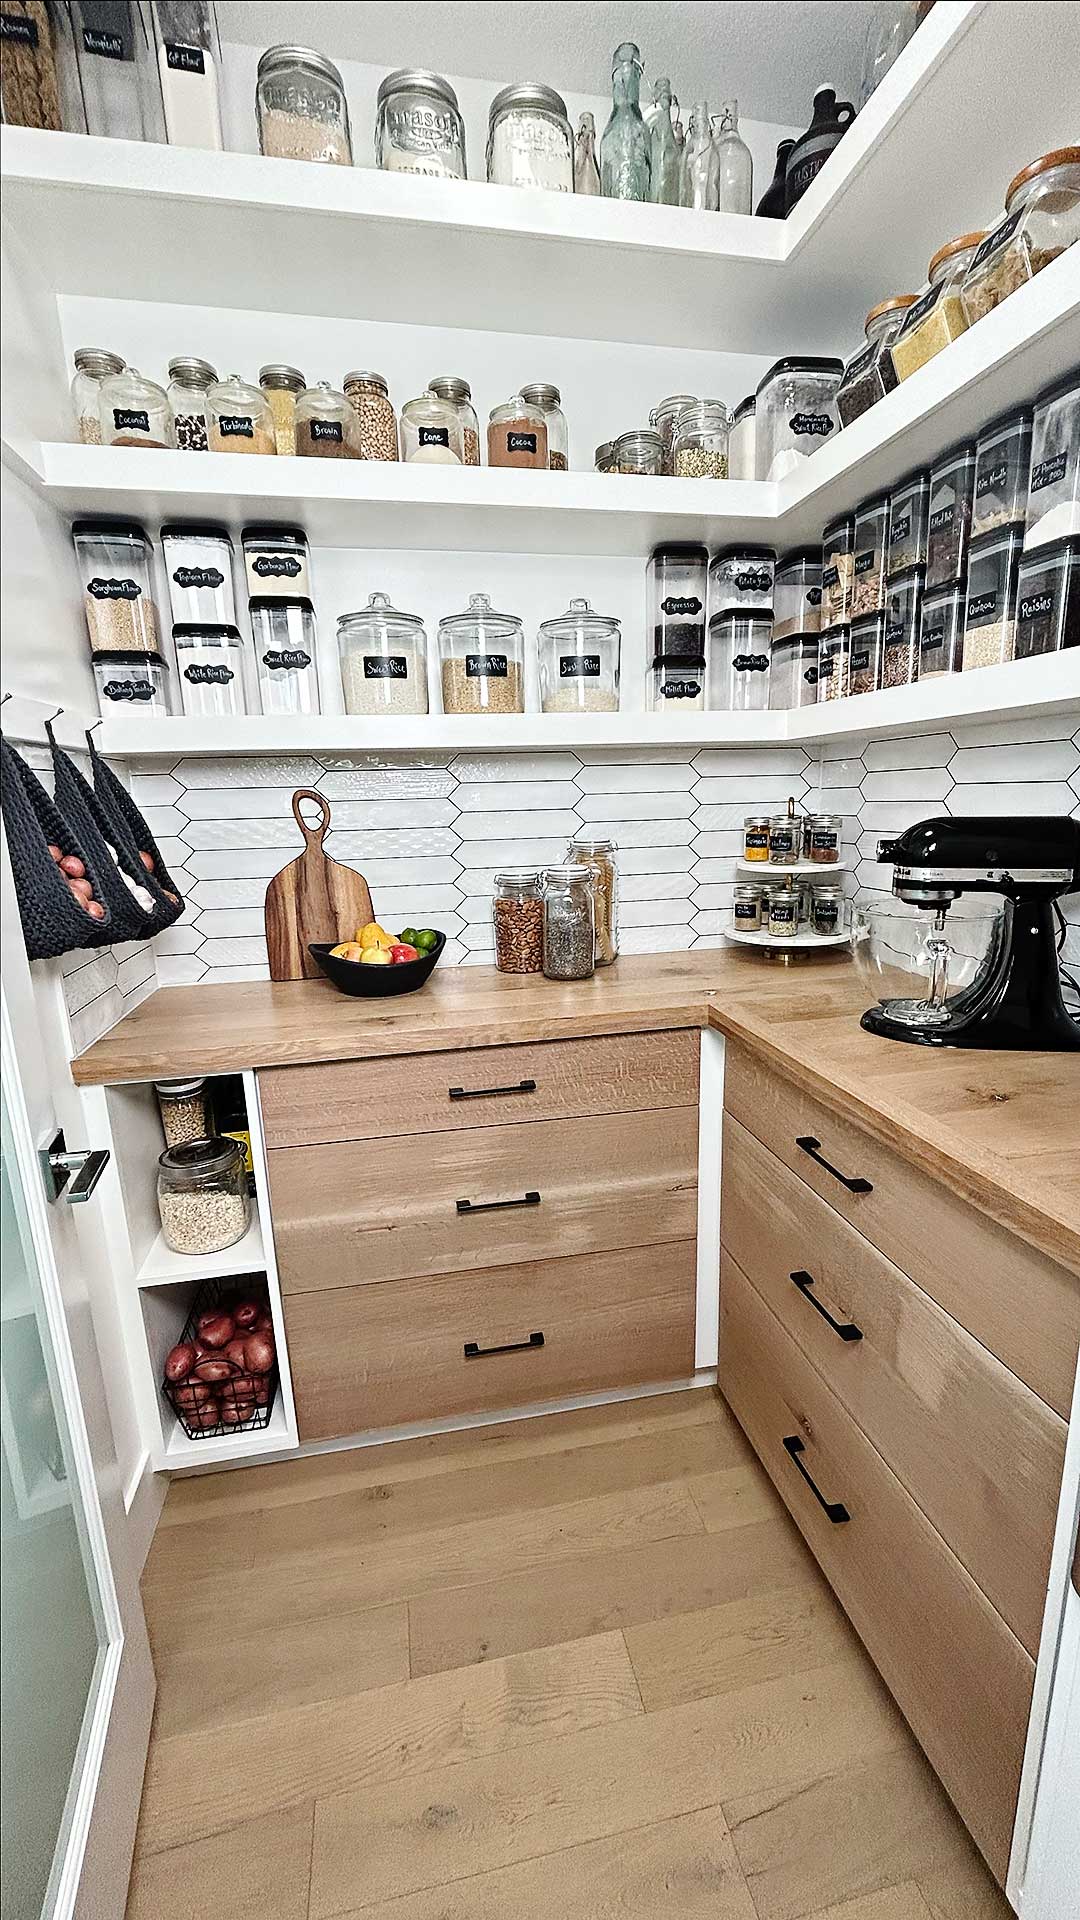 This timeless pantry with gorgeous floating shelves and a wood countertop is made even more functional with gorgeous crochet hanging baskets for simple and beautiful pantry organization. This pantry idea is both stunning and functional! #pantryidea, pantry organization, pantry idea, crochet patterns, free crochet pattern, crochet hanging basket, pantry idea, pantry design, floating shelves, how to build floating shelves, shelves, DIY shelves, wall shelves